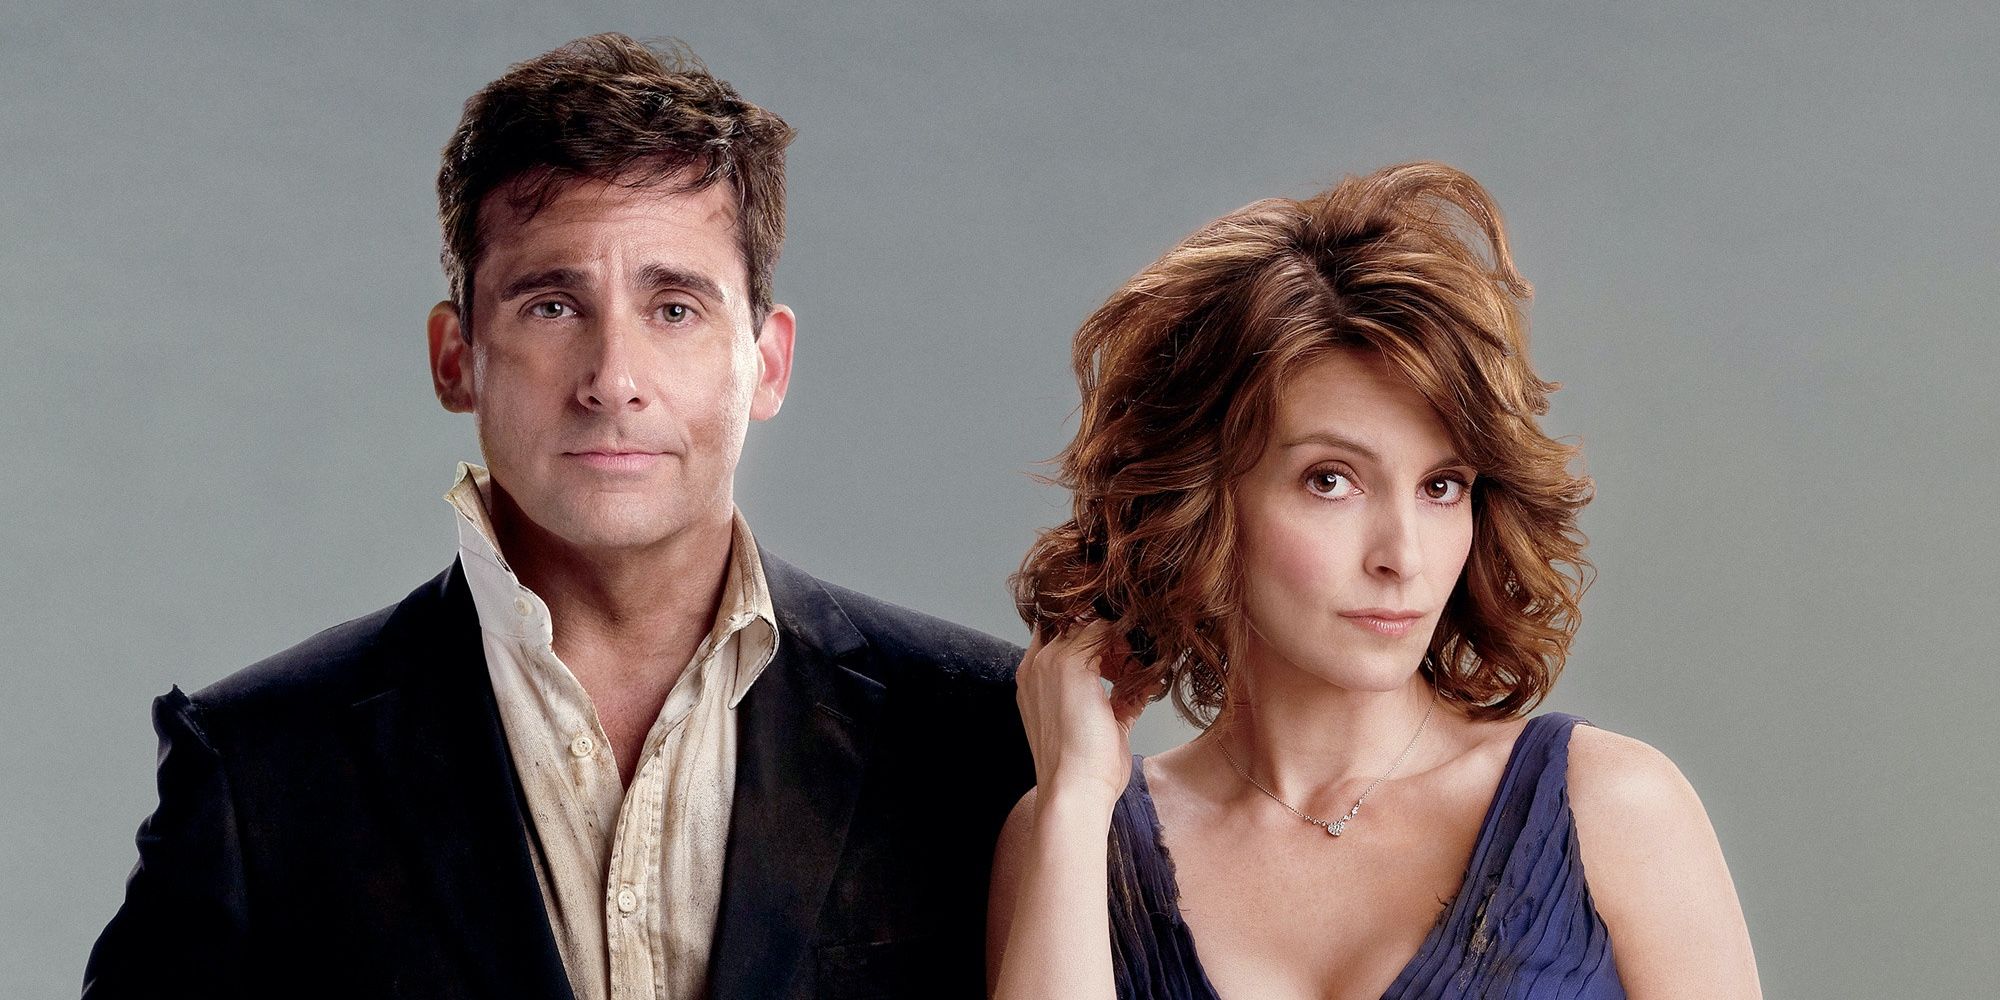 Tina Fey and Steve Carell standing side by side looking disheveled in Date Night.